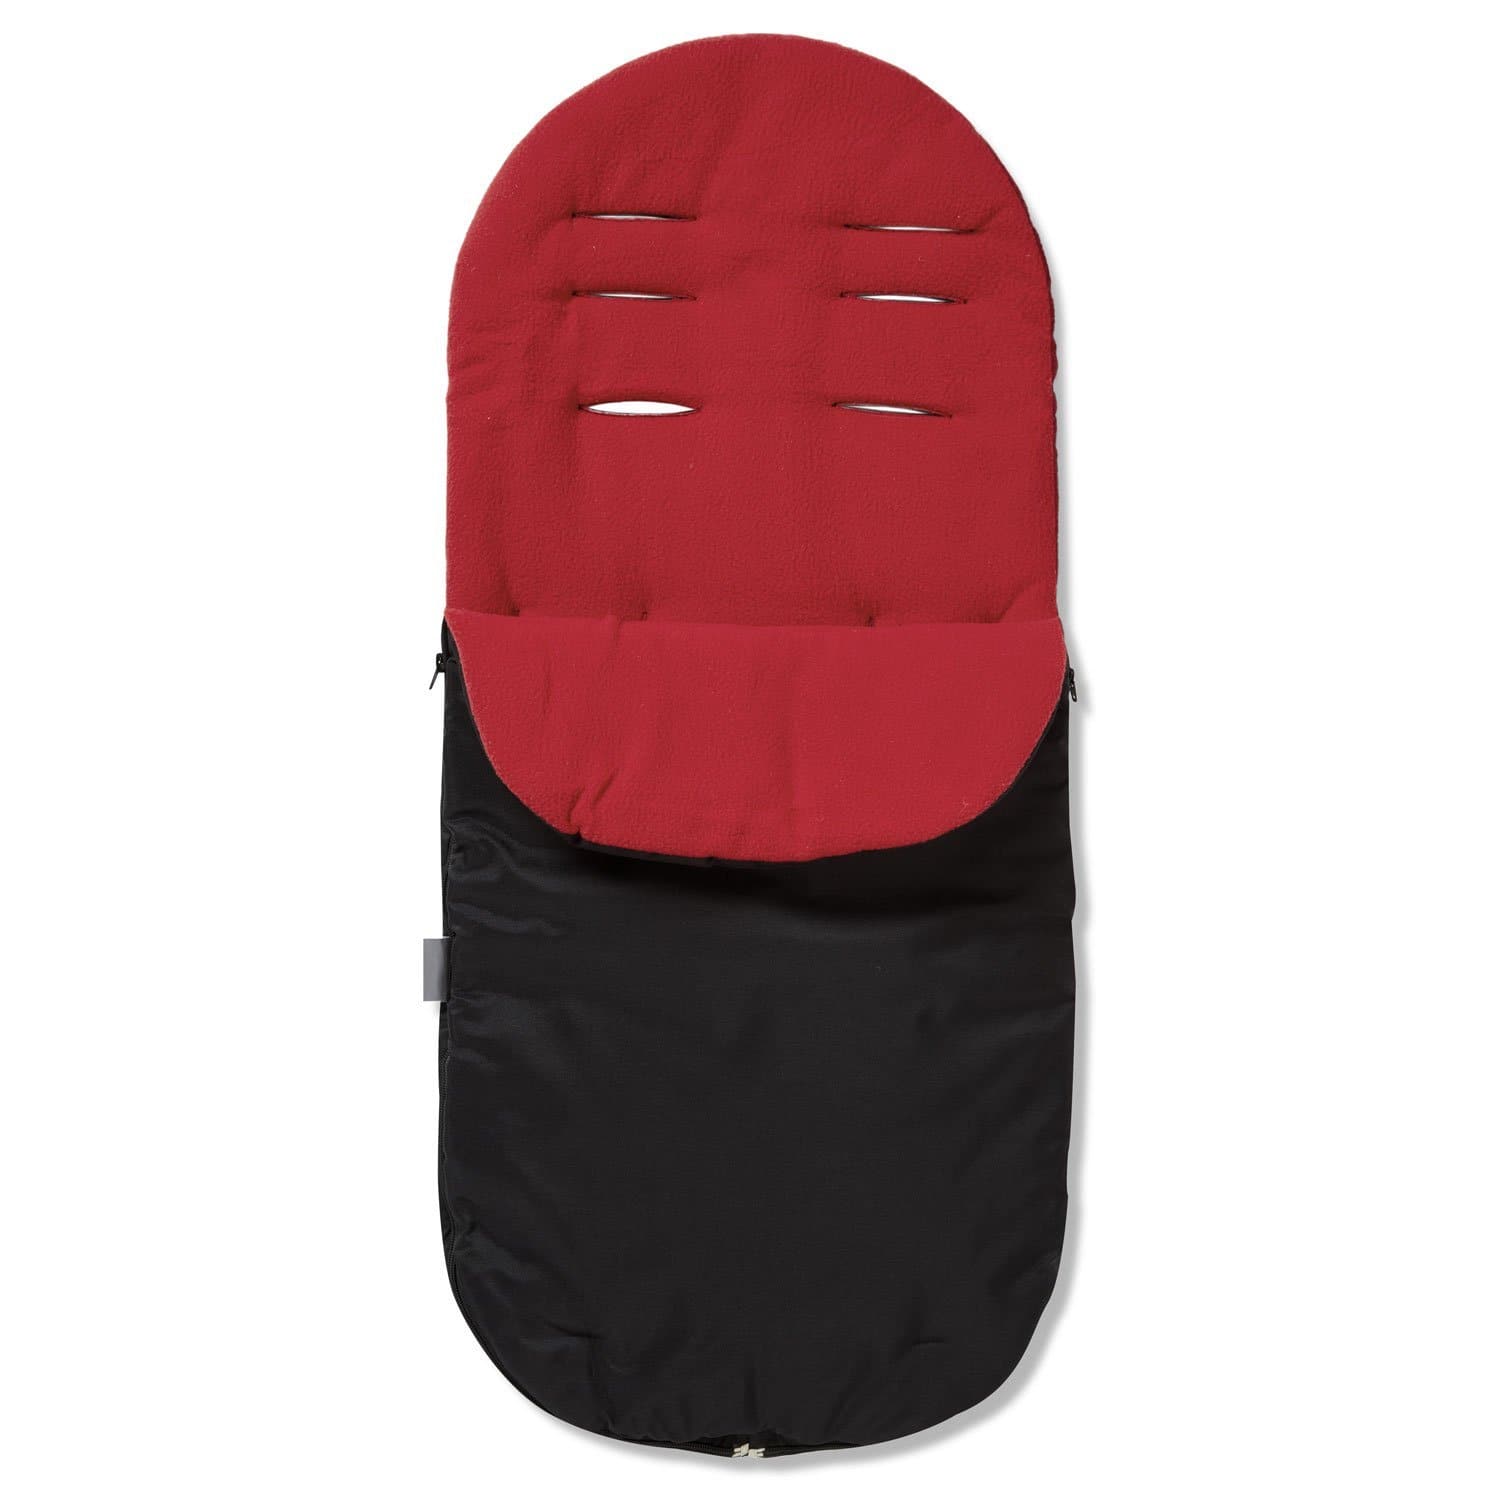 Footmuff / Cosy Toes Compatible with Diono - Red / Fits All Models | For Your Little One